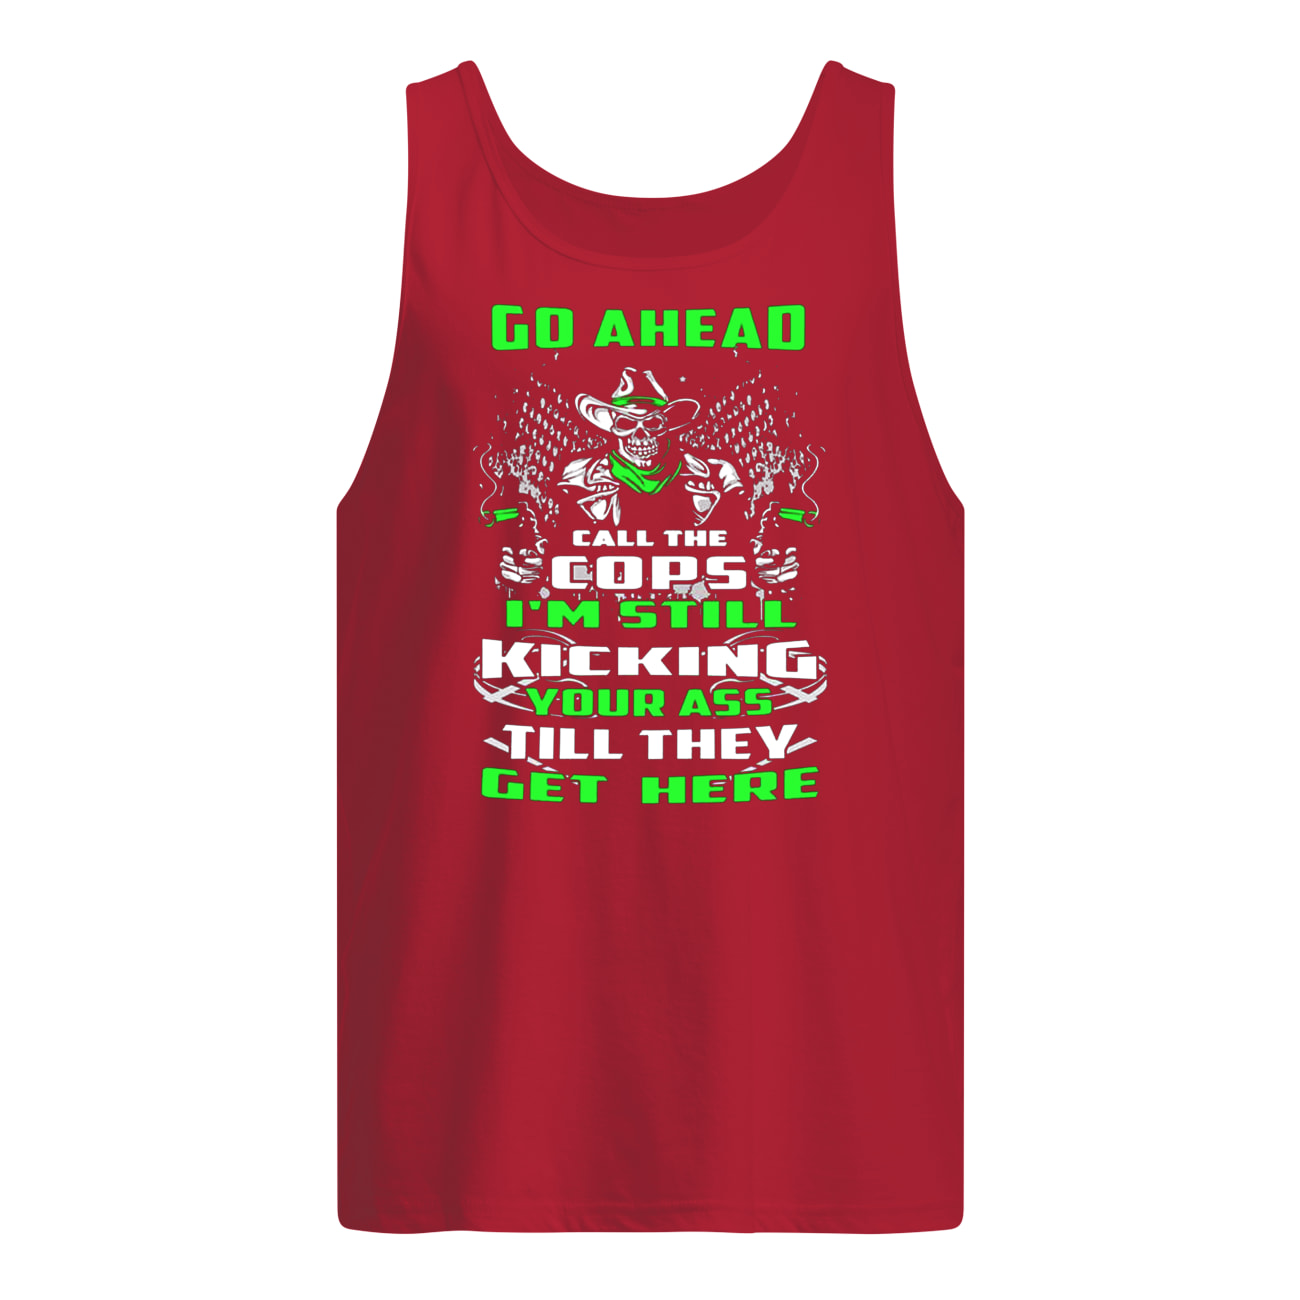 Skull go ahead call the cops I’m still kicking your ass till they get here tank top